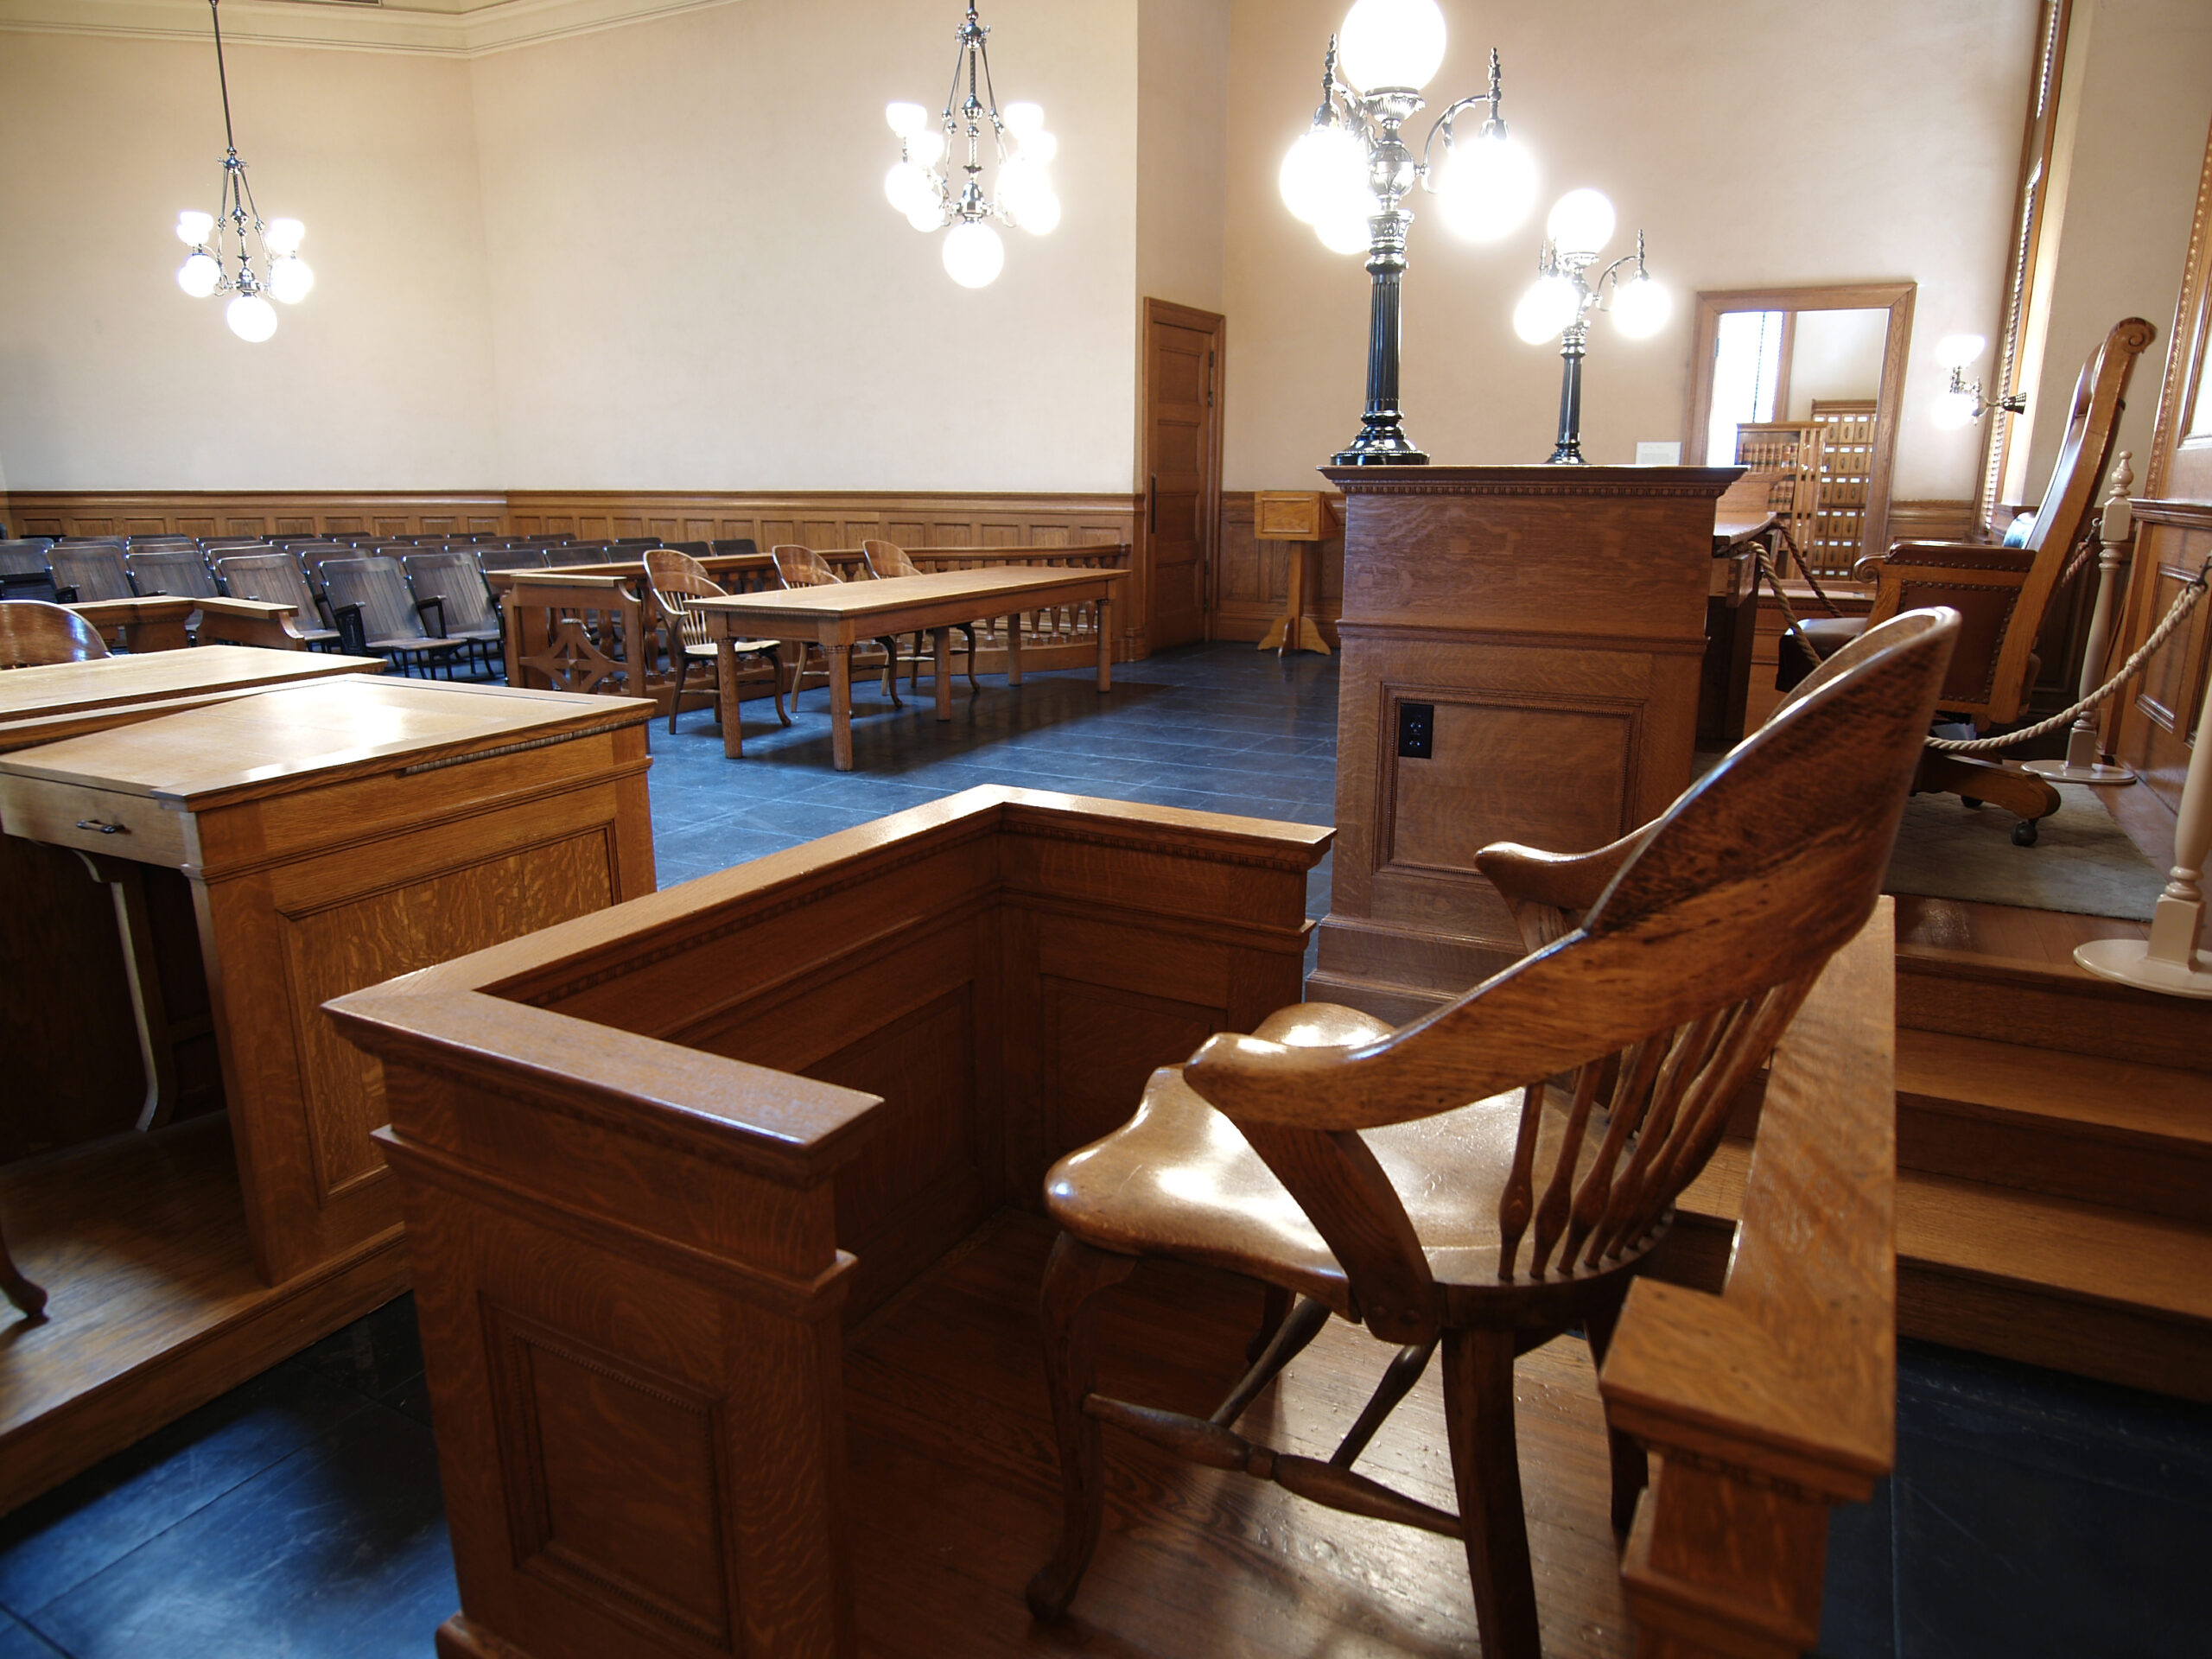 Courtroom Identifications: Unreliable and Suggestive